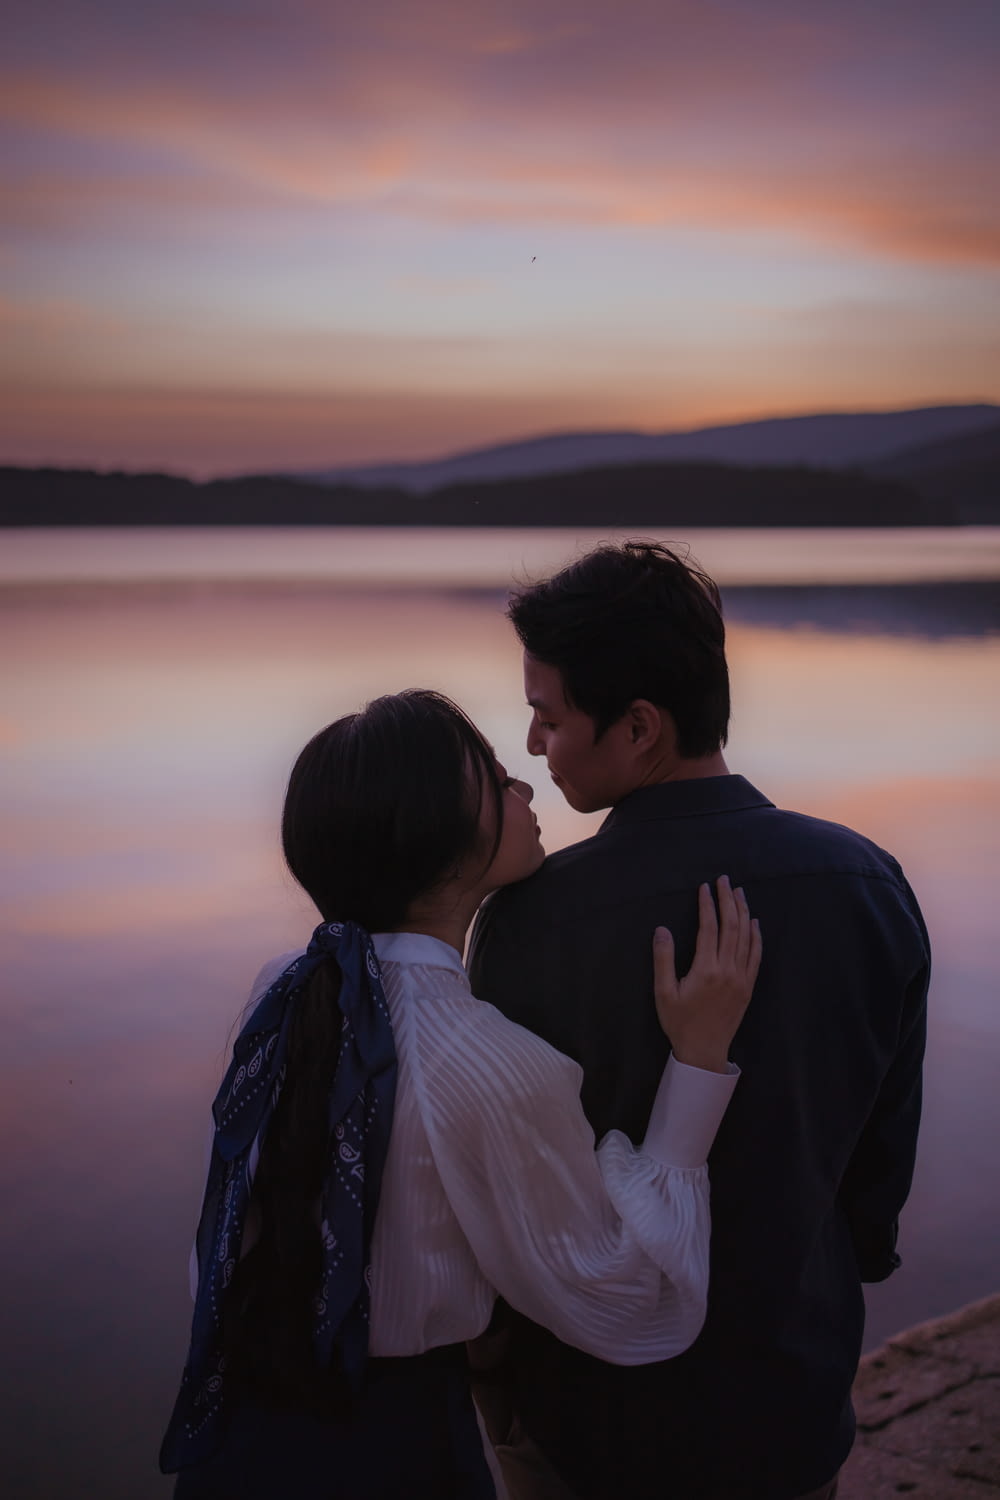 man and woman standing near body of water during sunset